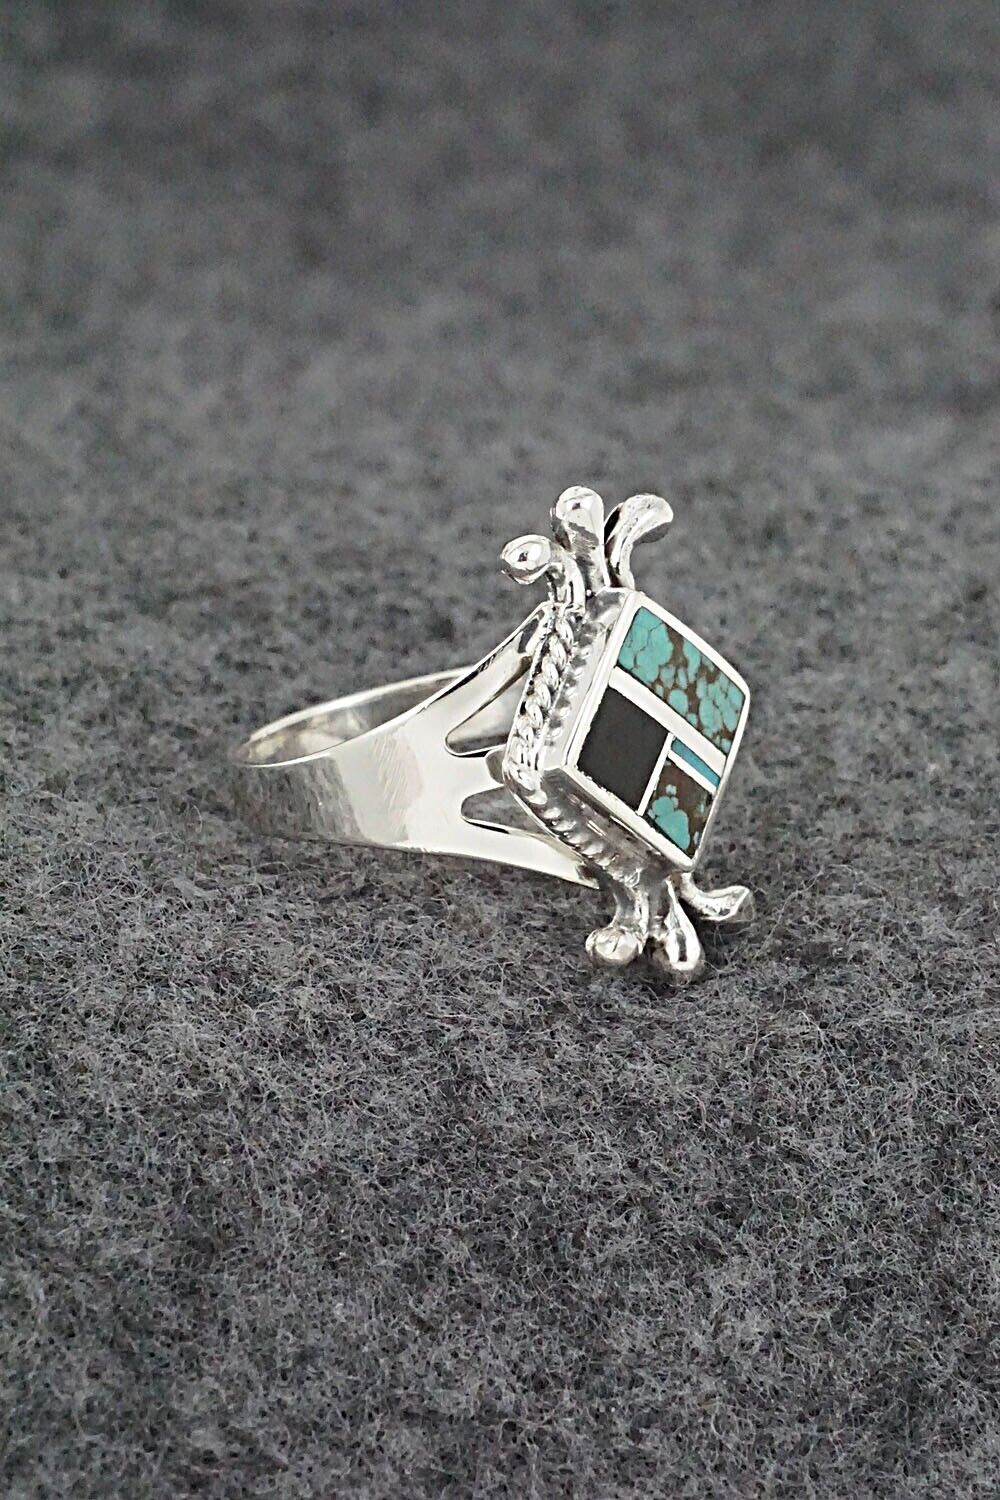 Turquoise, Onyx & Sterling Silver Inlay Ring - James Manygoats - Size 7.5